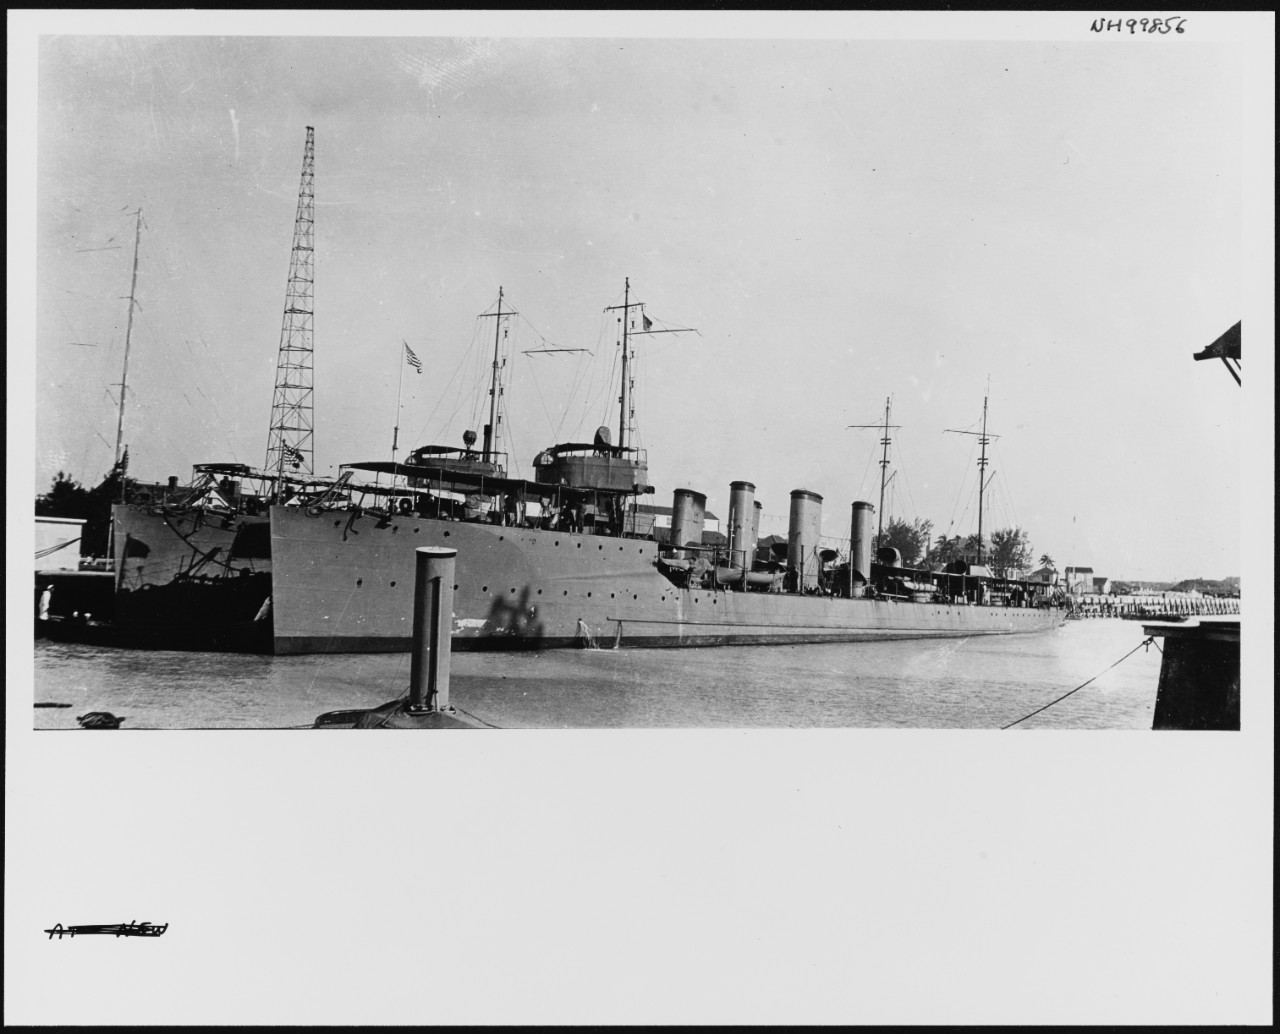 Photo #: NH 99856  Destroyers at an East or Gulf Coast Port